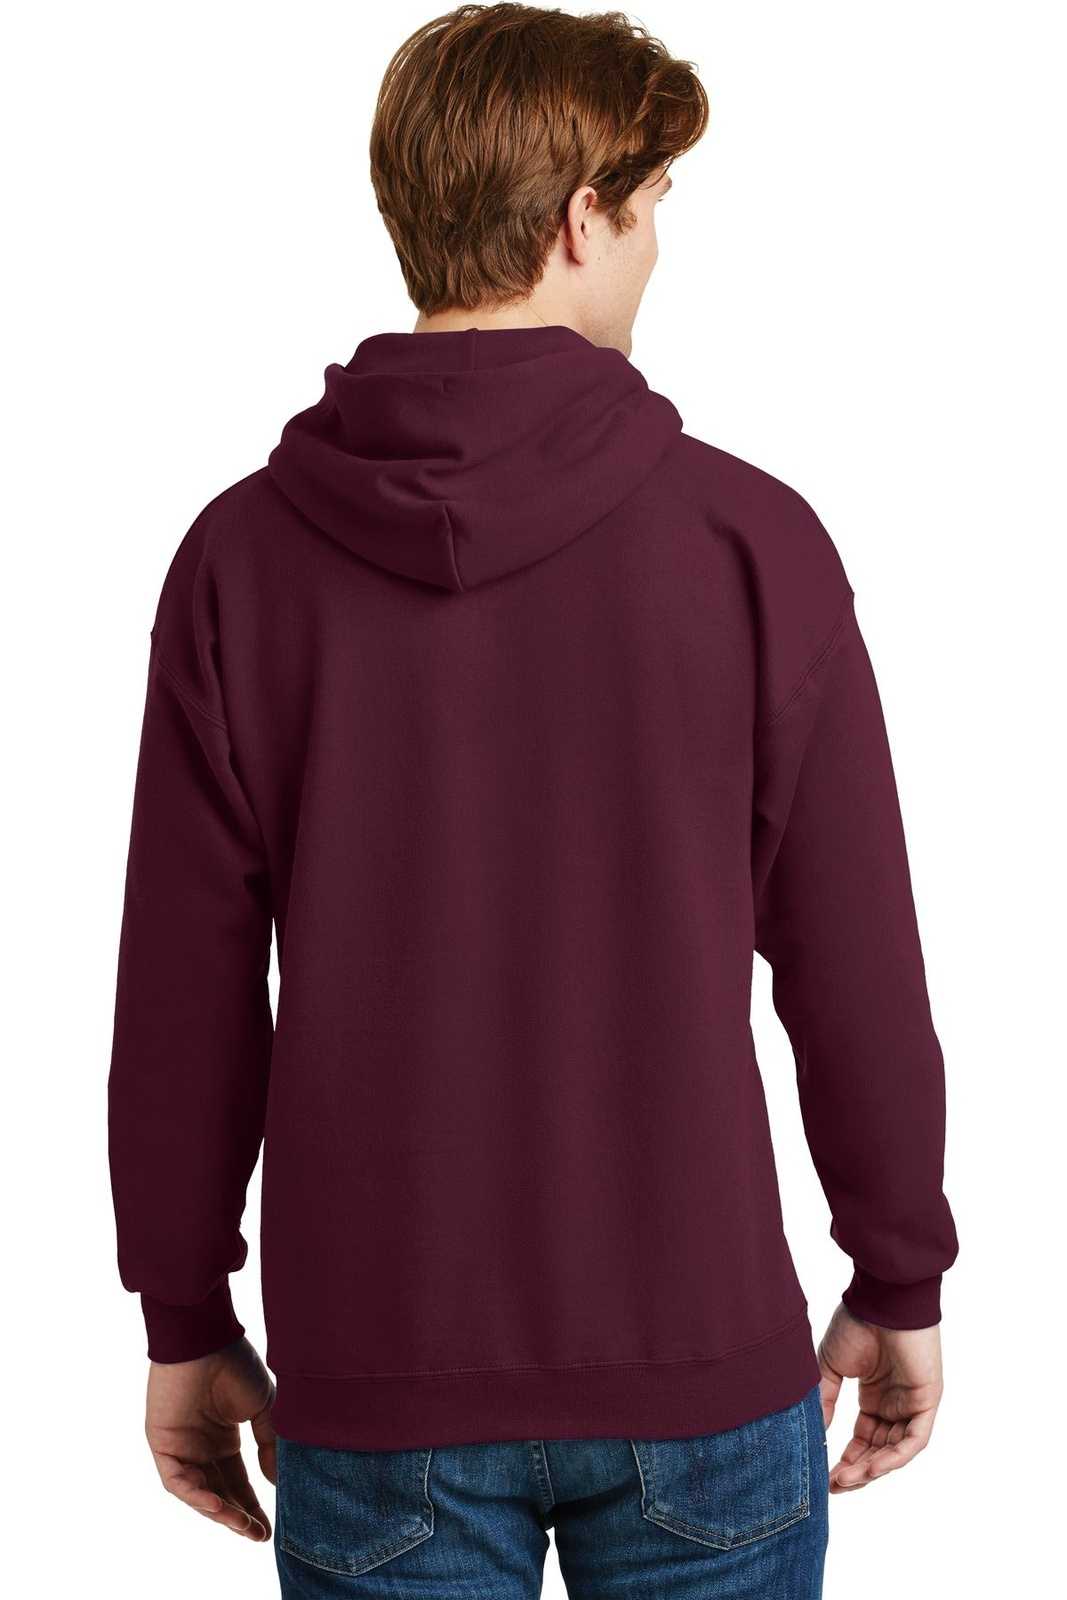 Hanes F170 Ultimate Cotton Pullover Hooded Sweatshirt - Maroon - HIT a Double